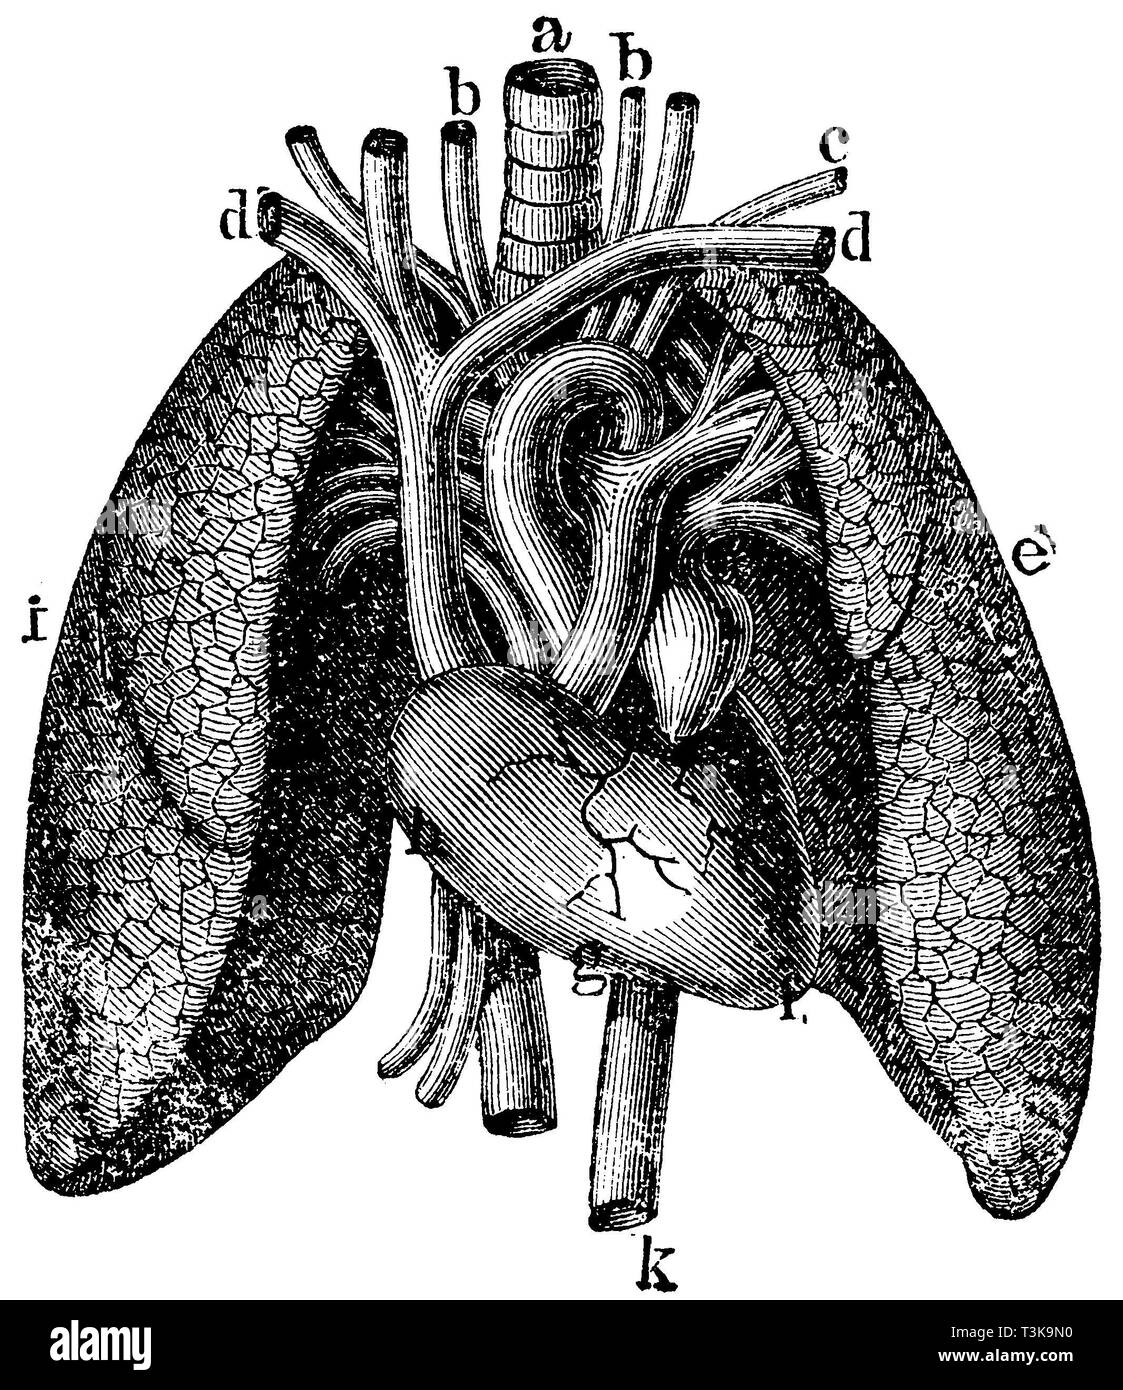 Lungs , heart and main artery strains of a human trachea, b head artery , c Armpulsader arm veins d e f left lung left ventricle right ventricle g h i right atrium right pulmonary k aorta;Human lungs, heart and main artery trunks a Trachea, b Head artery, c Arm artery d Arm veins e Left lung f Left ventricle g Right ventricle h Right ventricle i Right lung k Aorta, anonym  1877 Stock Photo